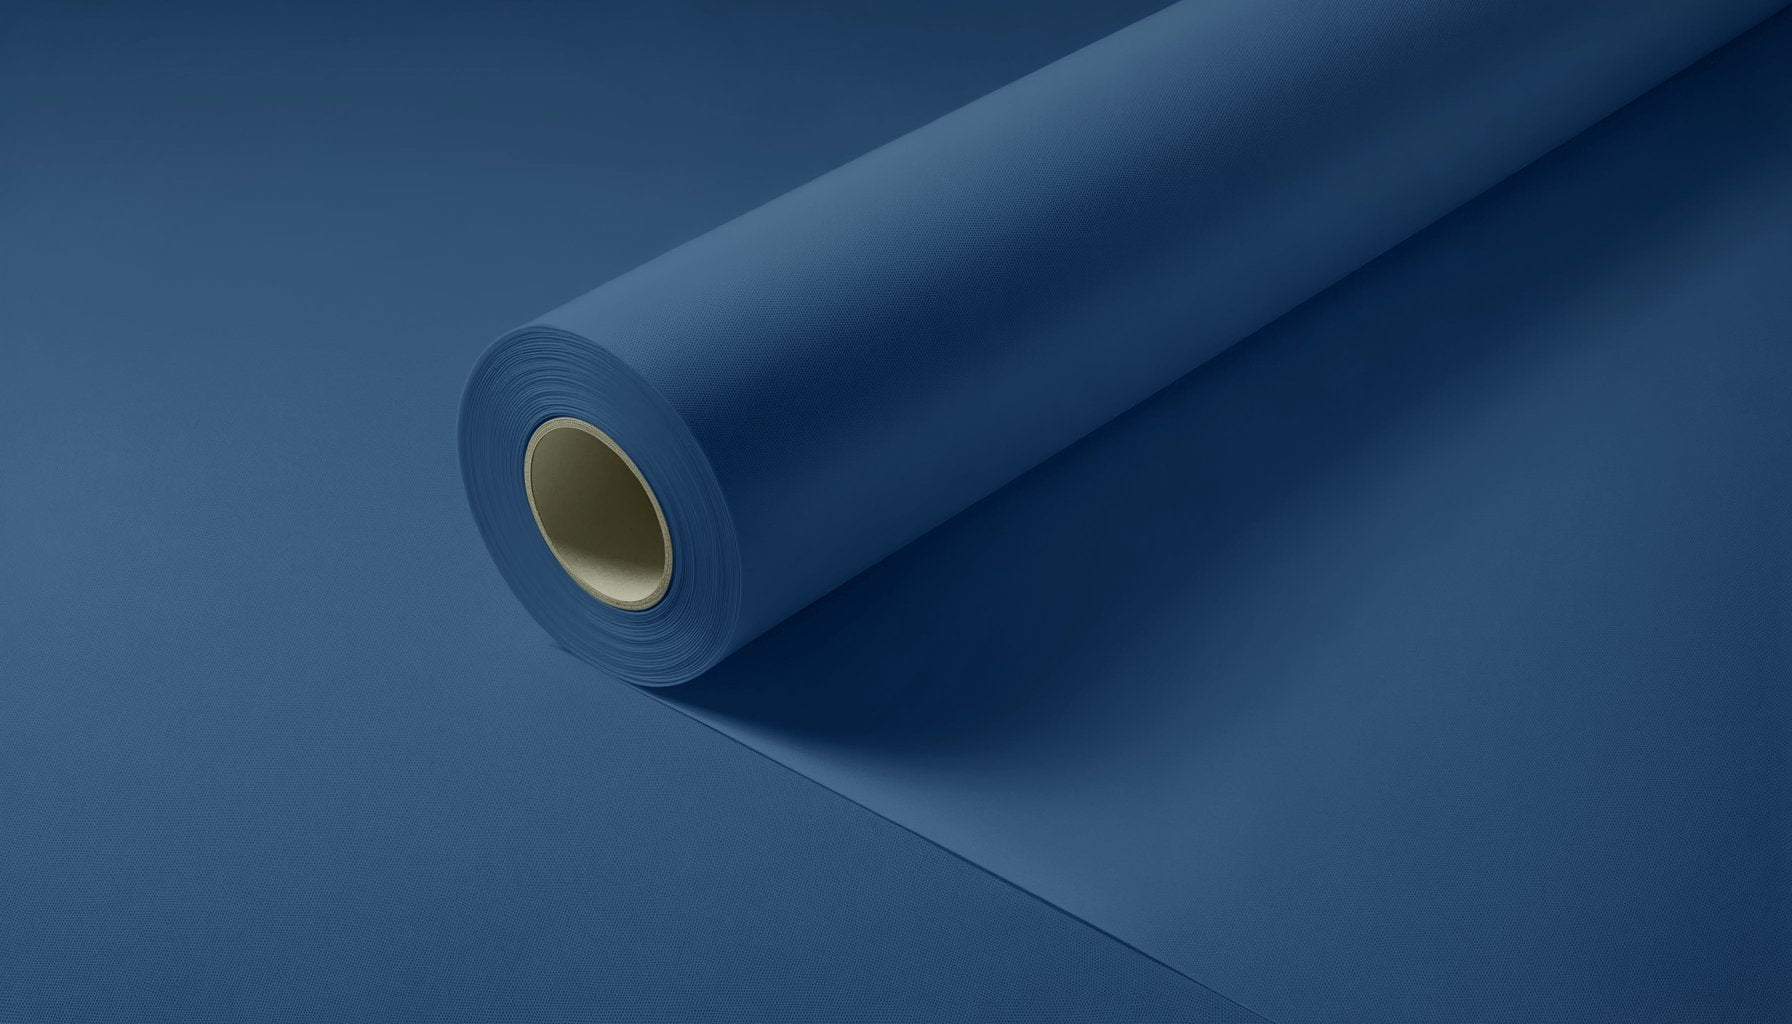 Peel & Stick Removable Re-usable Paint - Color RAL 5003 Sapphire Blue - offRAL™ - RALRAW LLC, USA